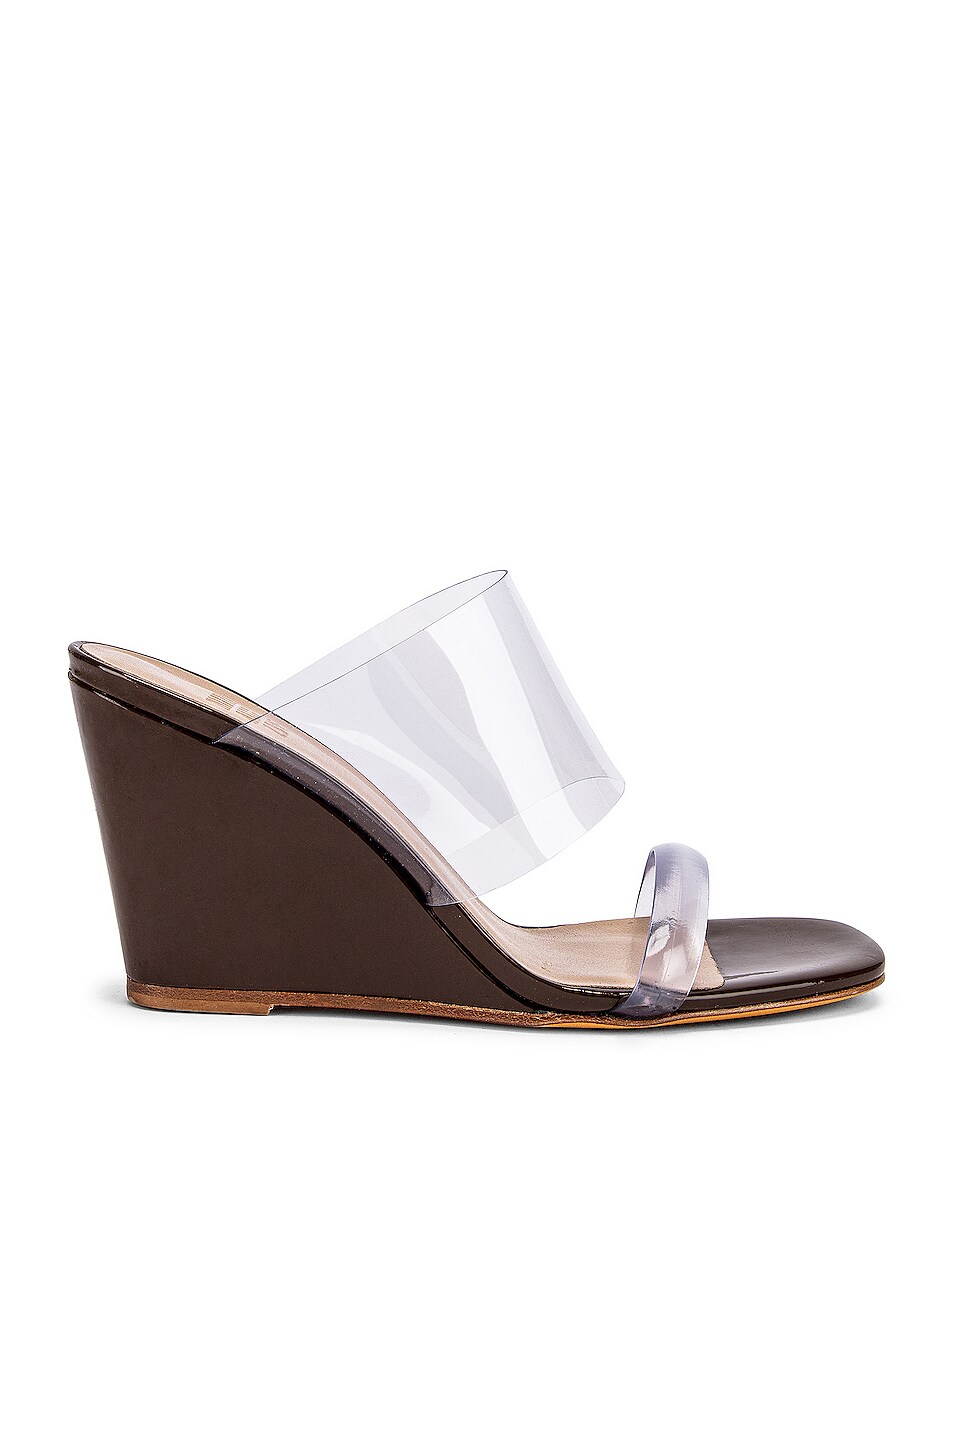 Image 1 of Maryam Nassir Zadeh Olympia Wedge in Carob Patent